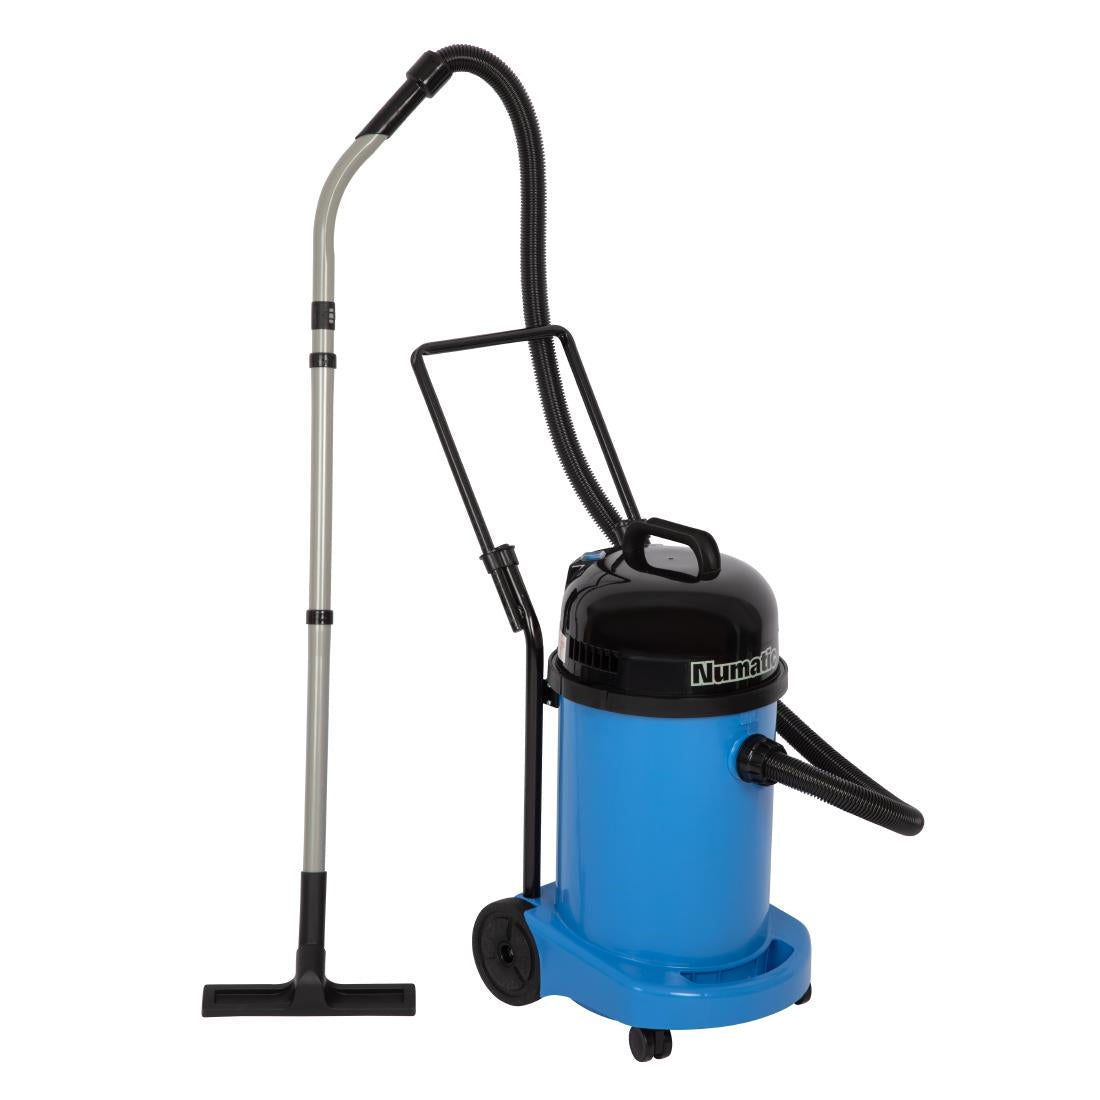 Numatic Professional Wet and Dry Vacuum Cleaner WV470